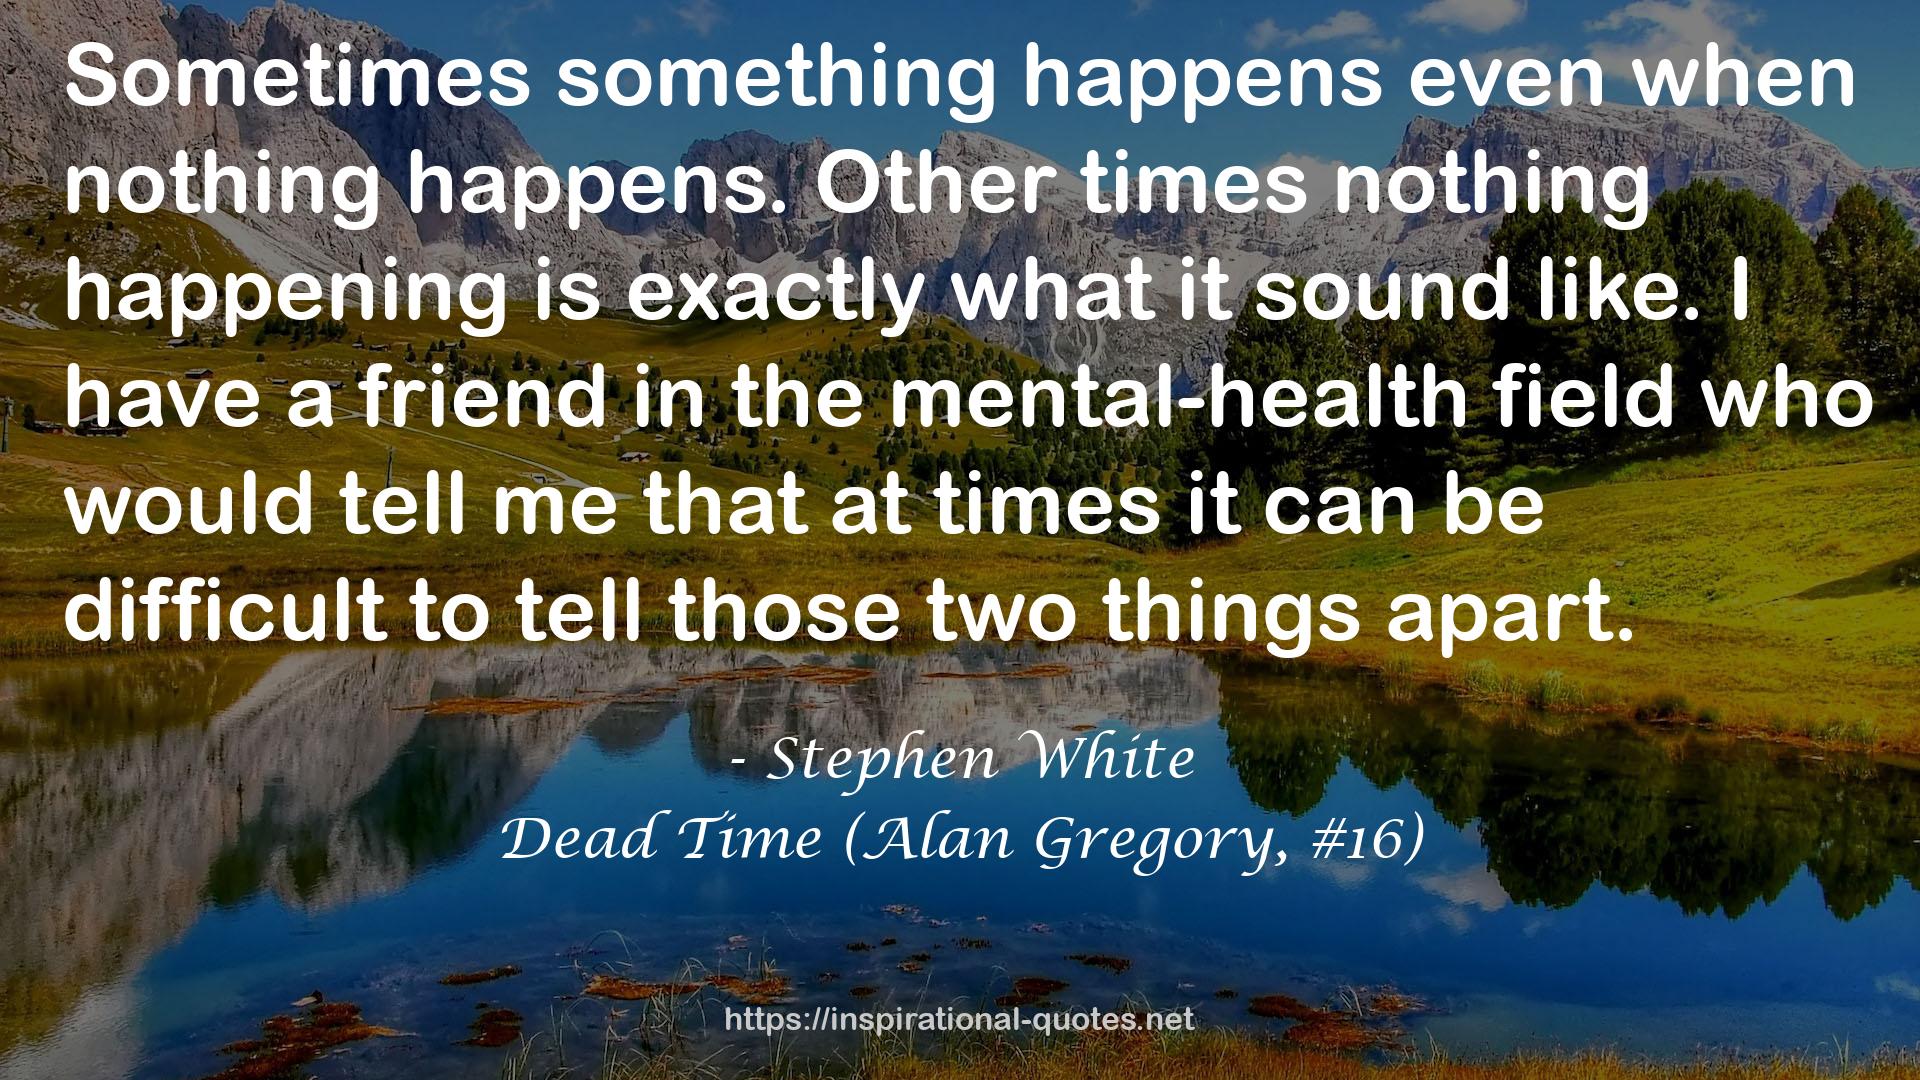 Dead Time (Alan Gregory, #16) QUOTES